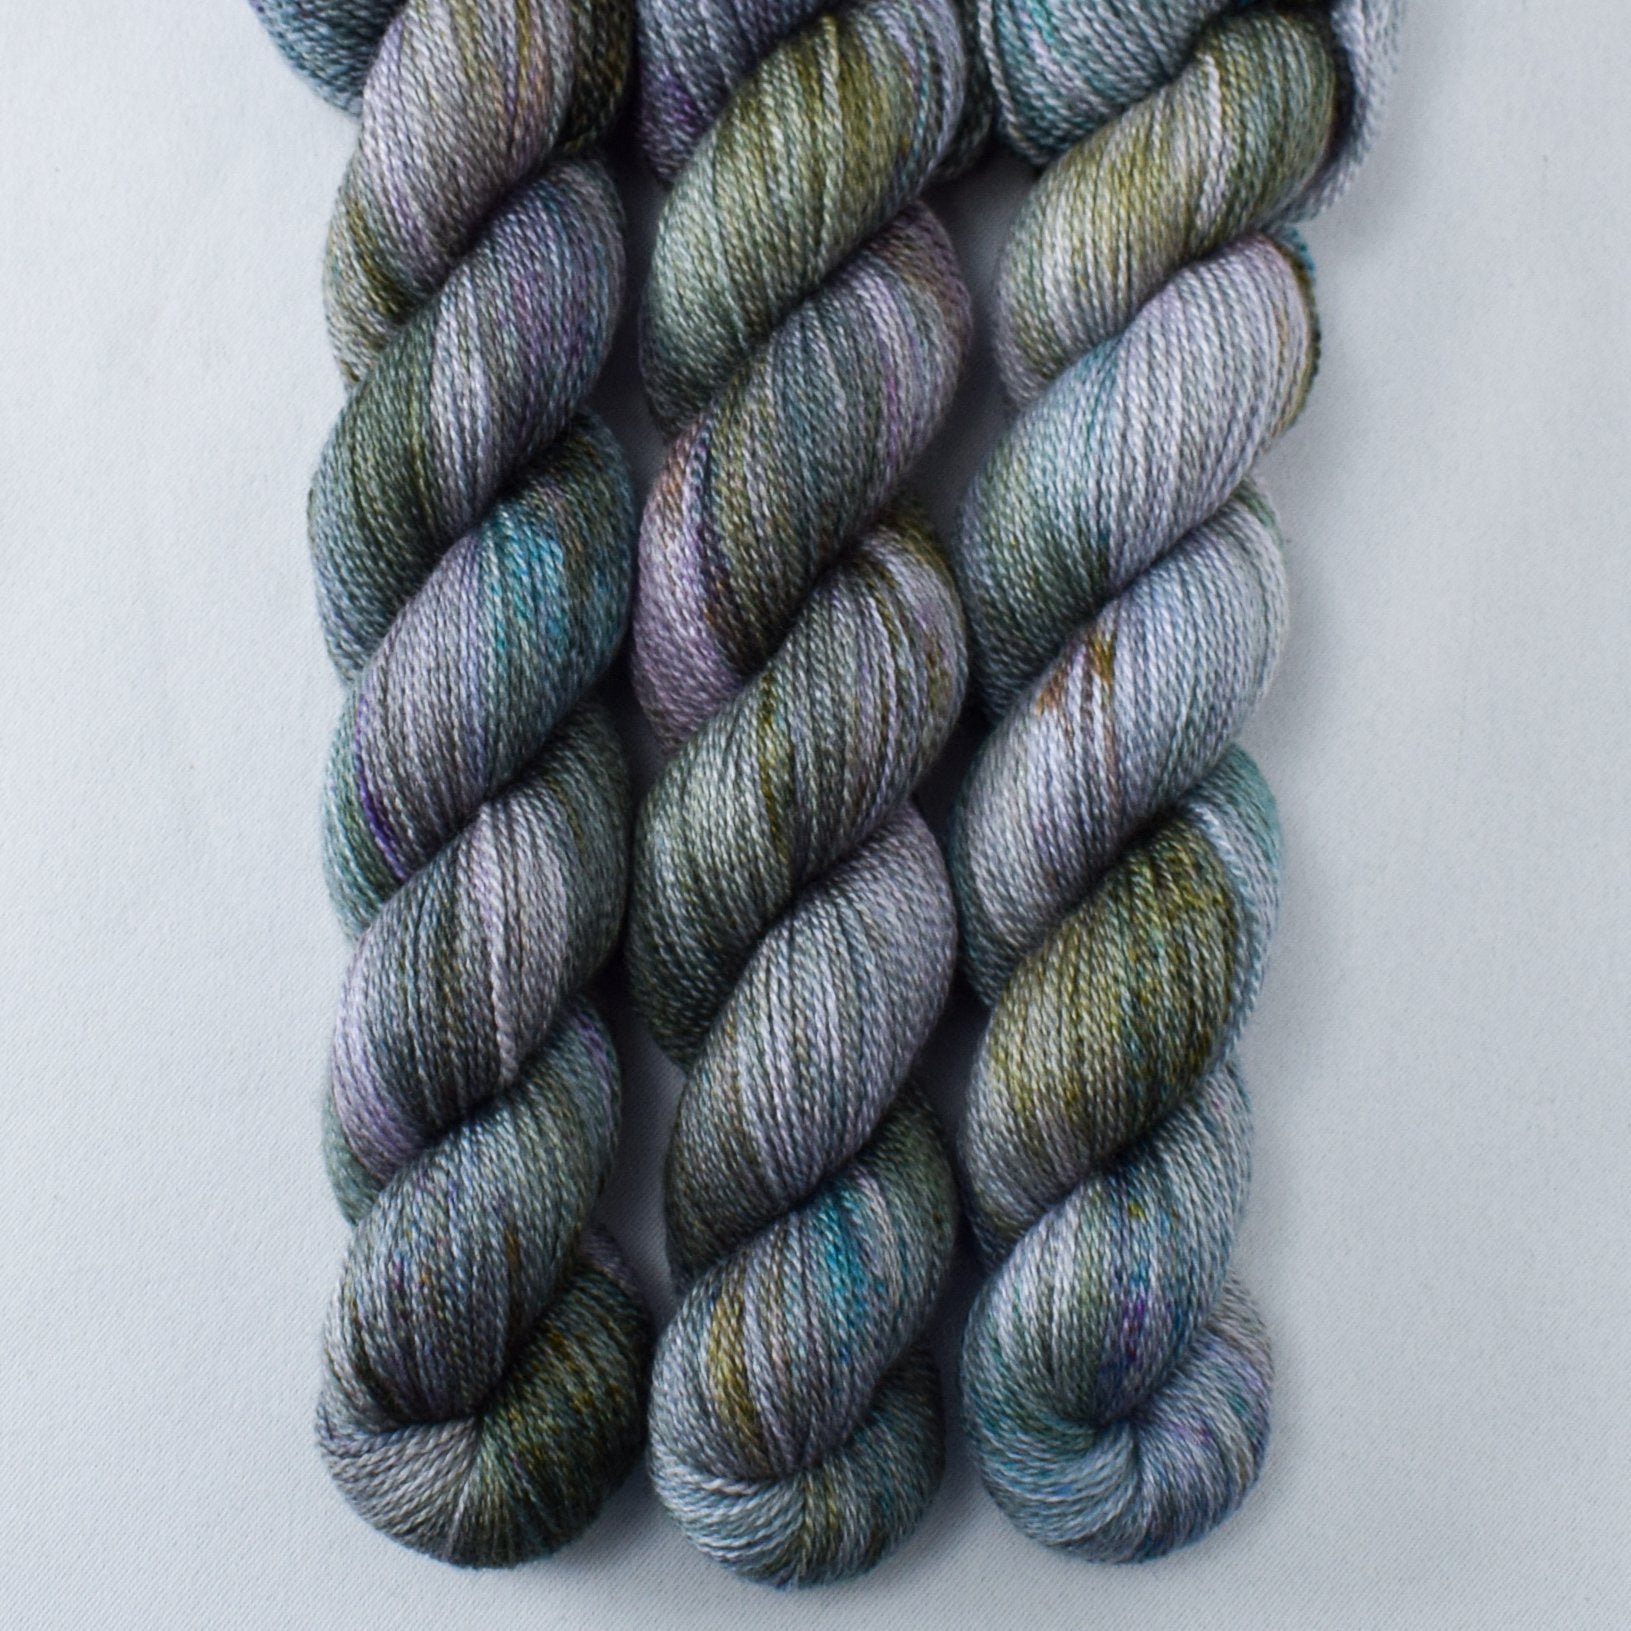 Turn of Events - Miss Babs Yet yarn